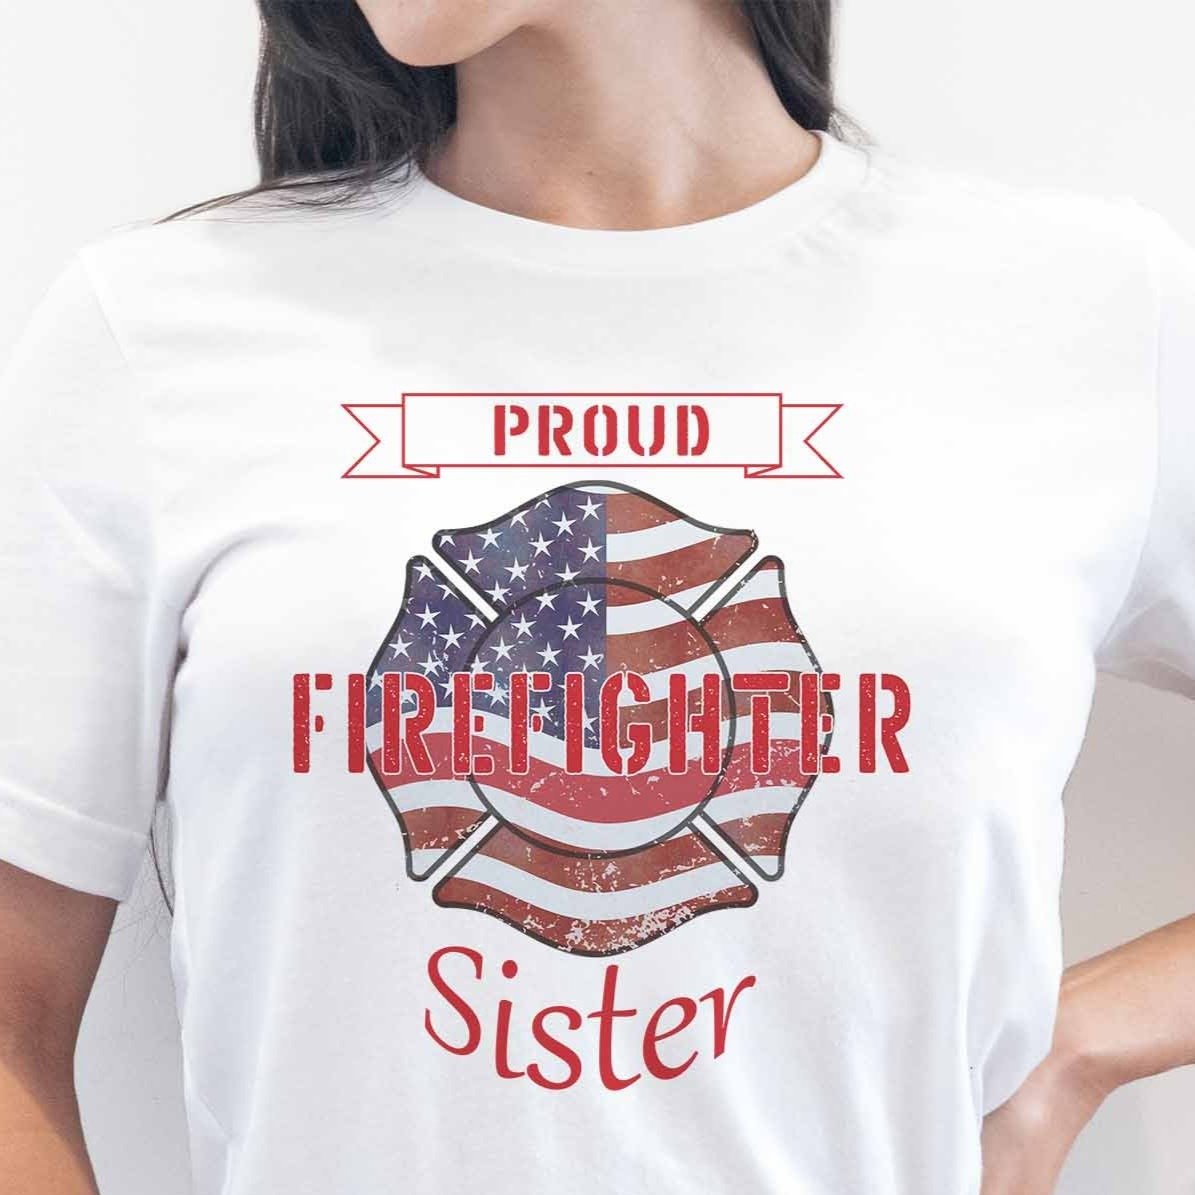 Proud Firefighter Sister - My Custom Tee Party